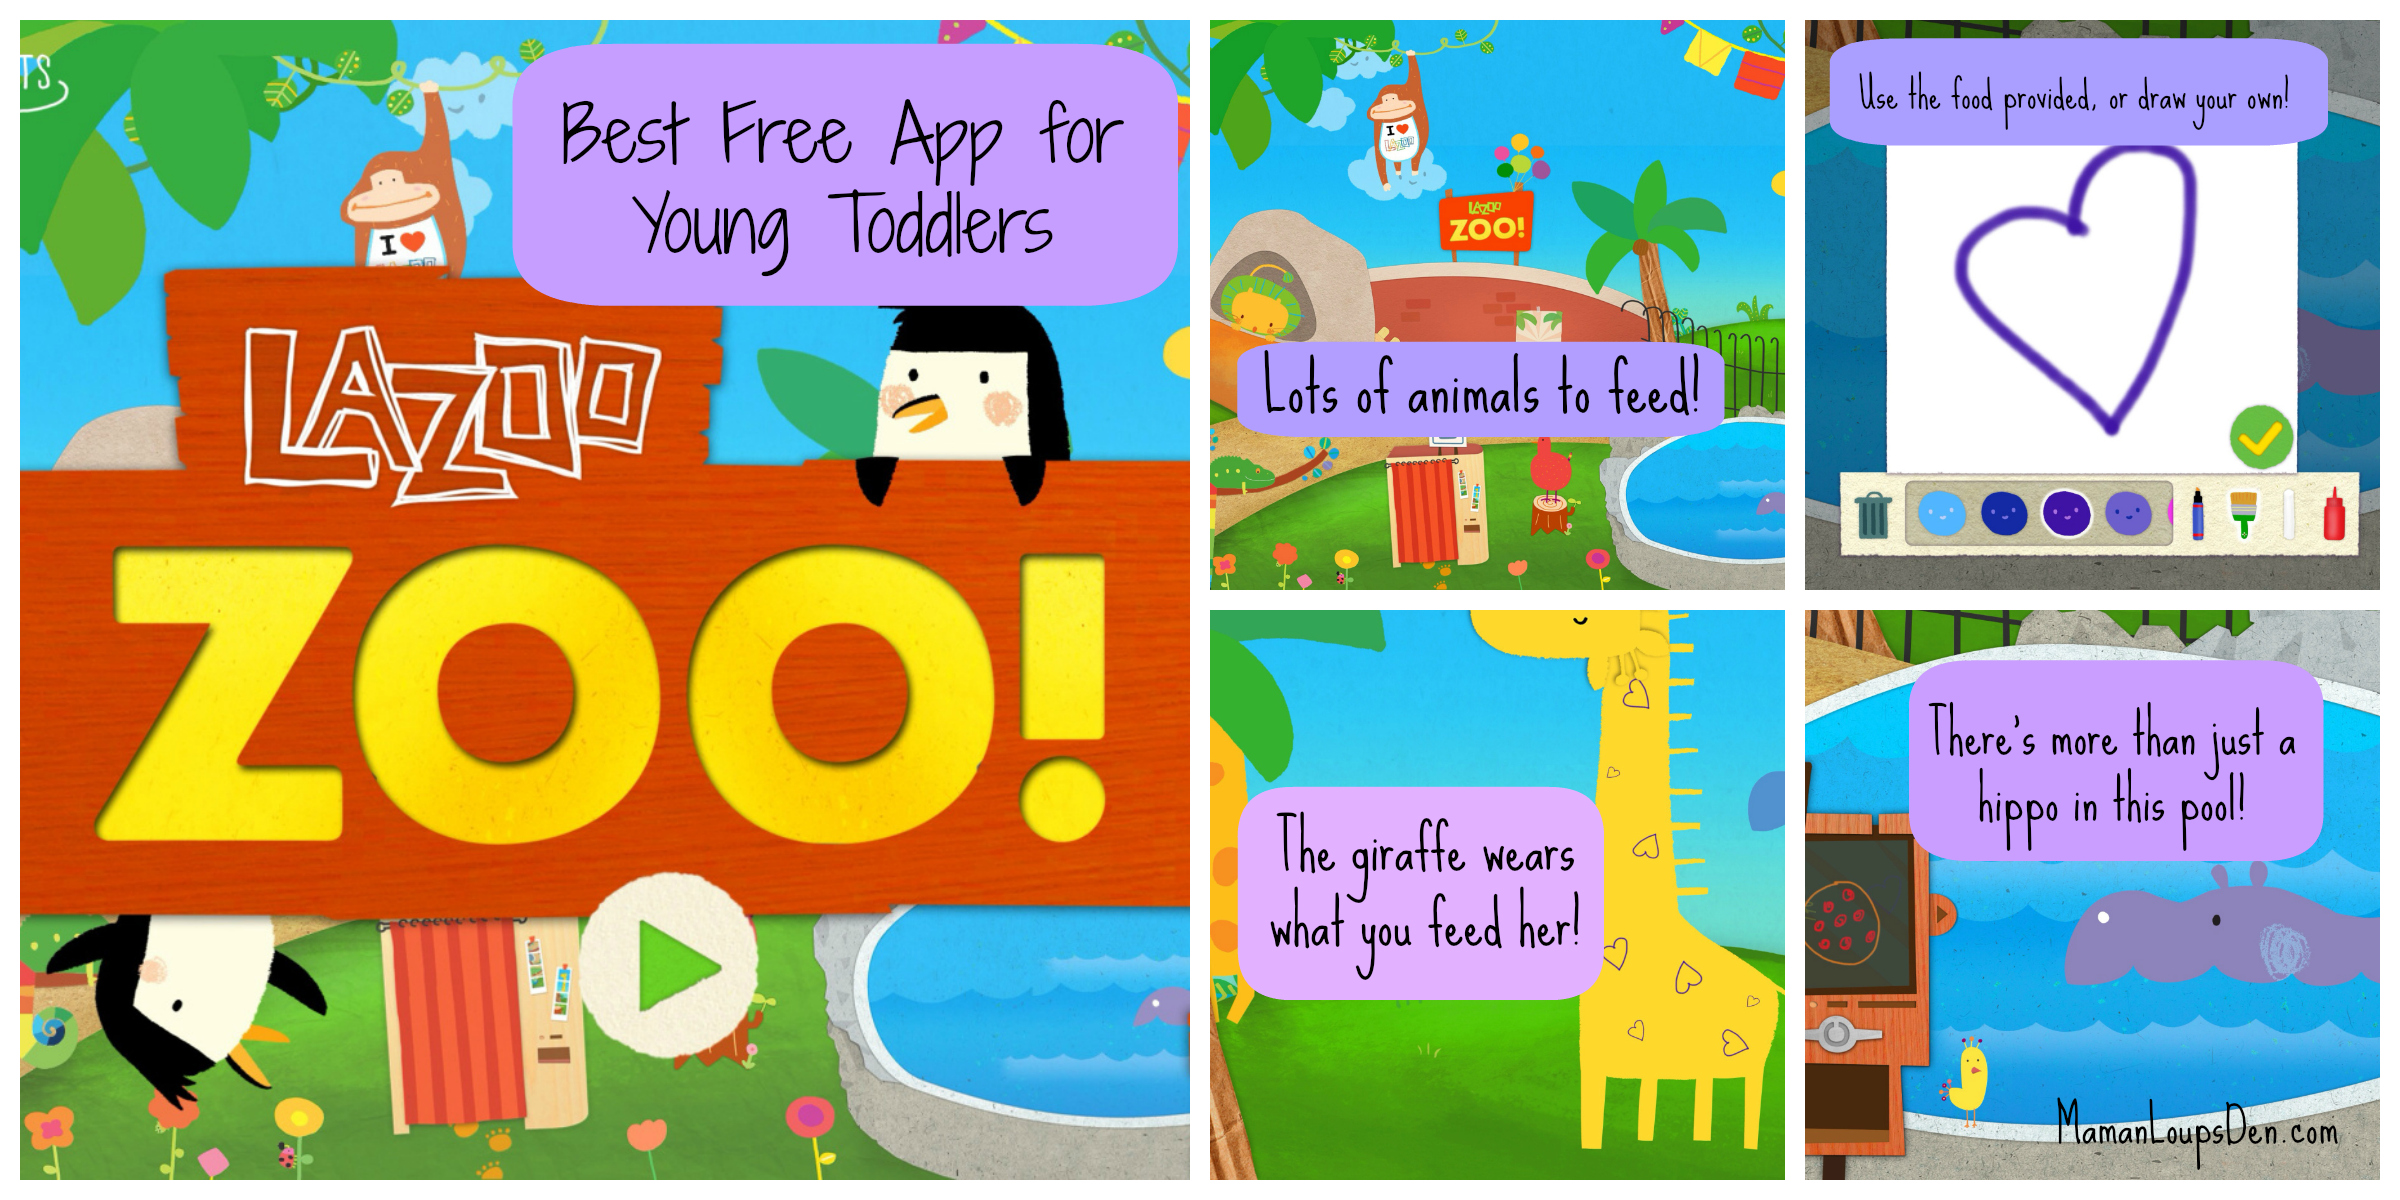 Best Free App for Toddlers